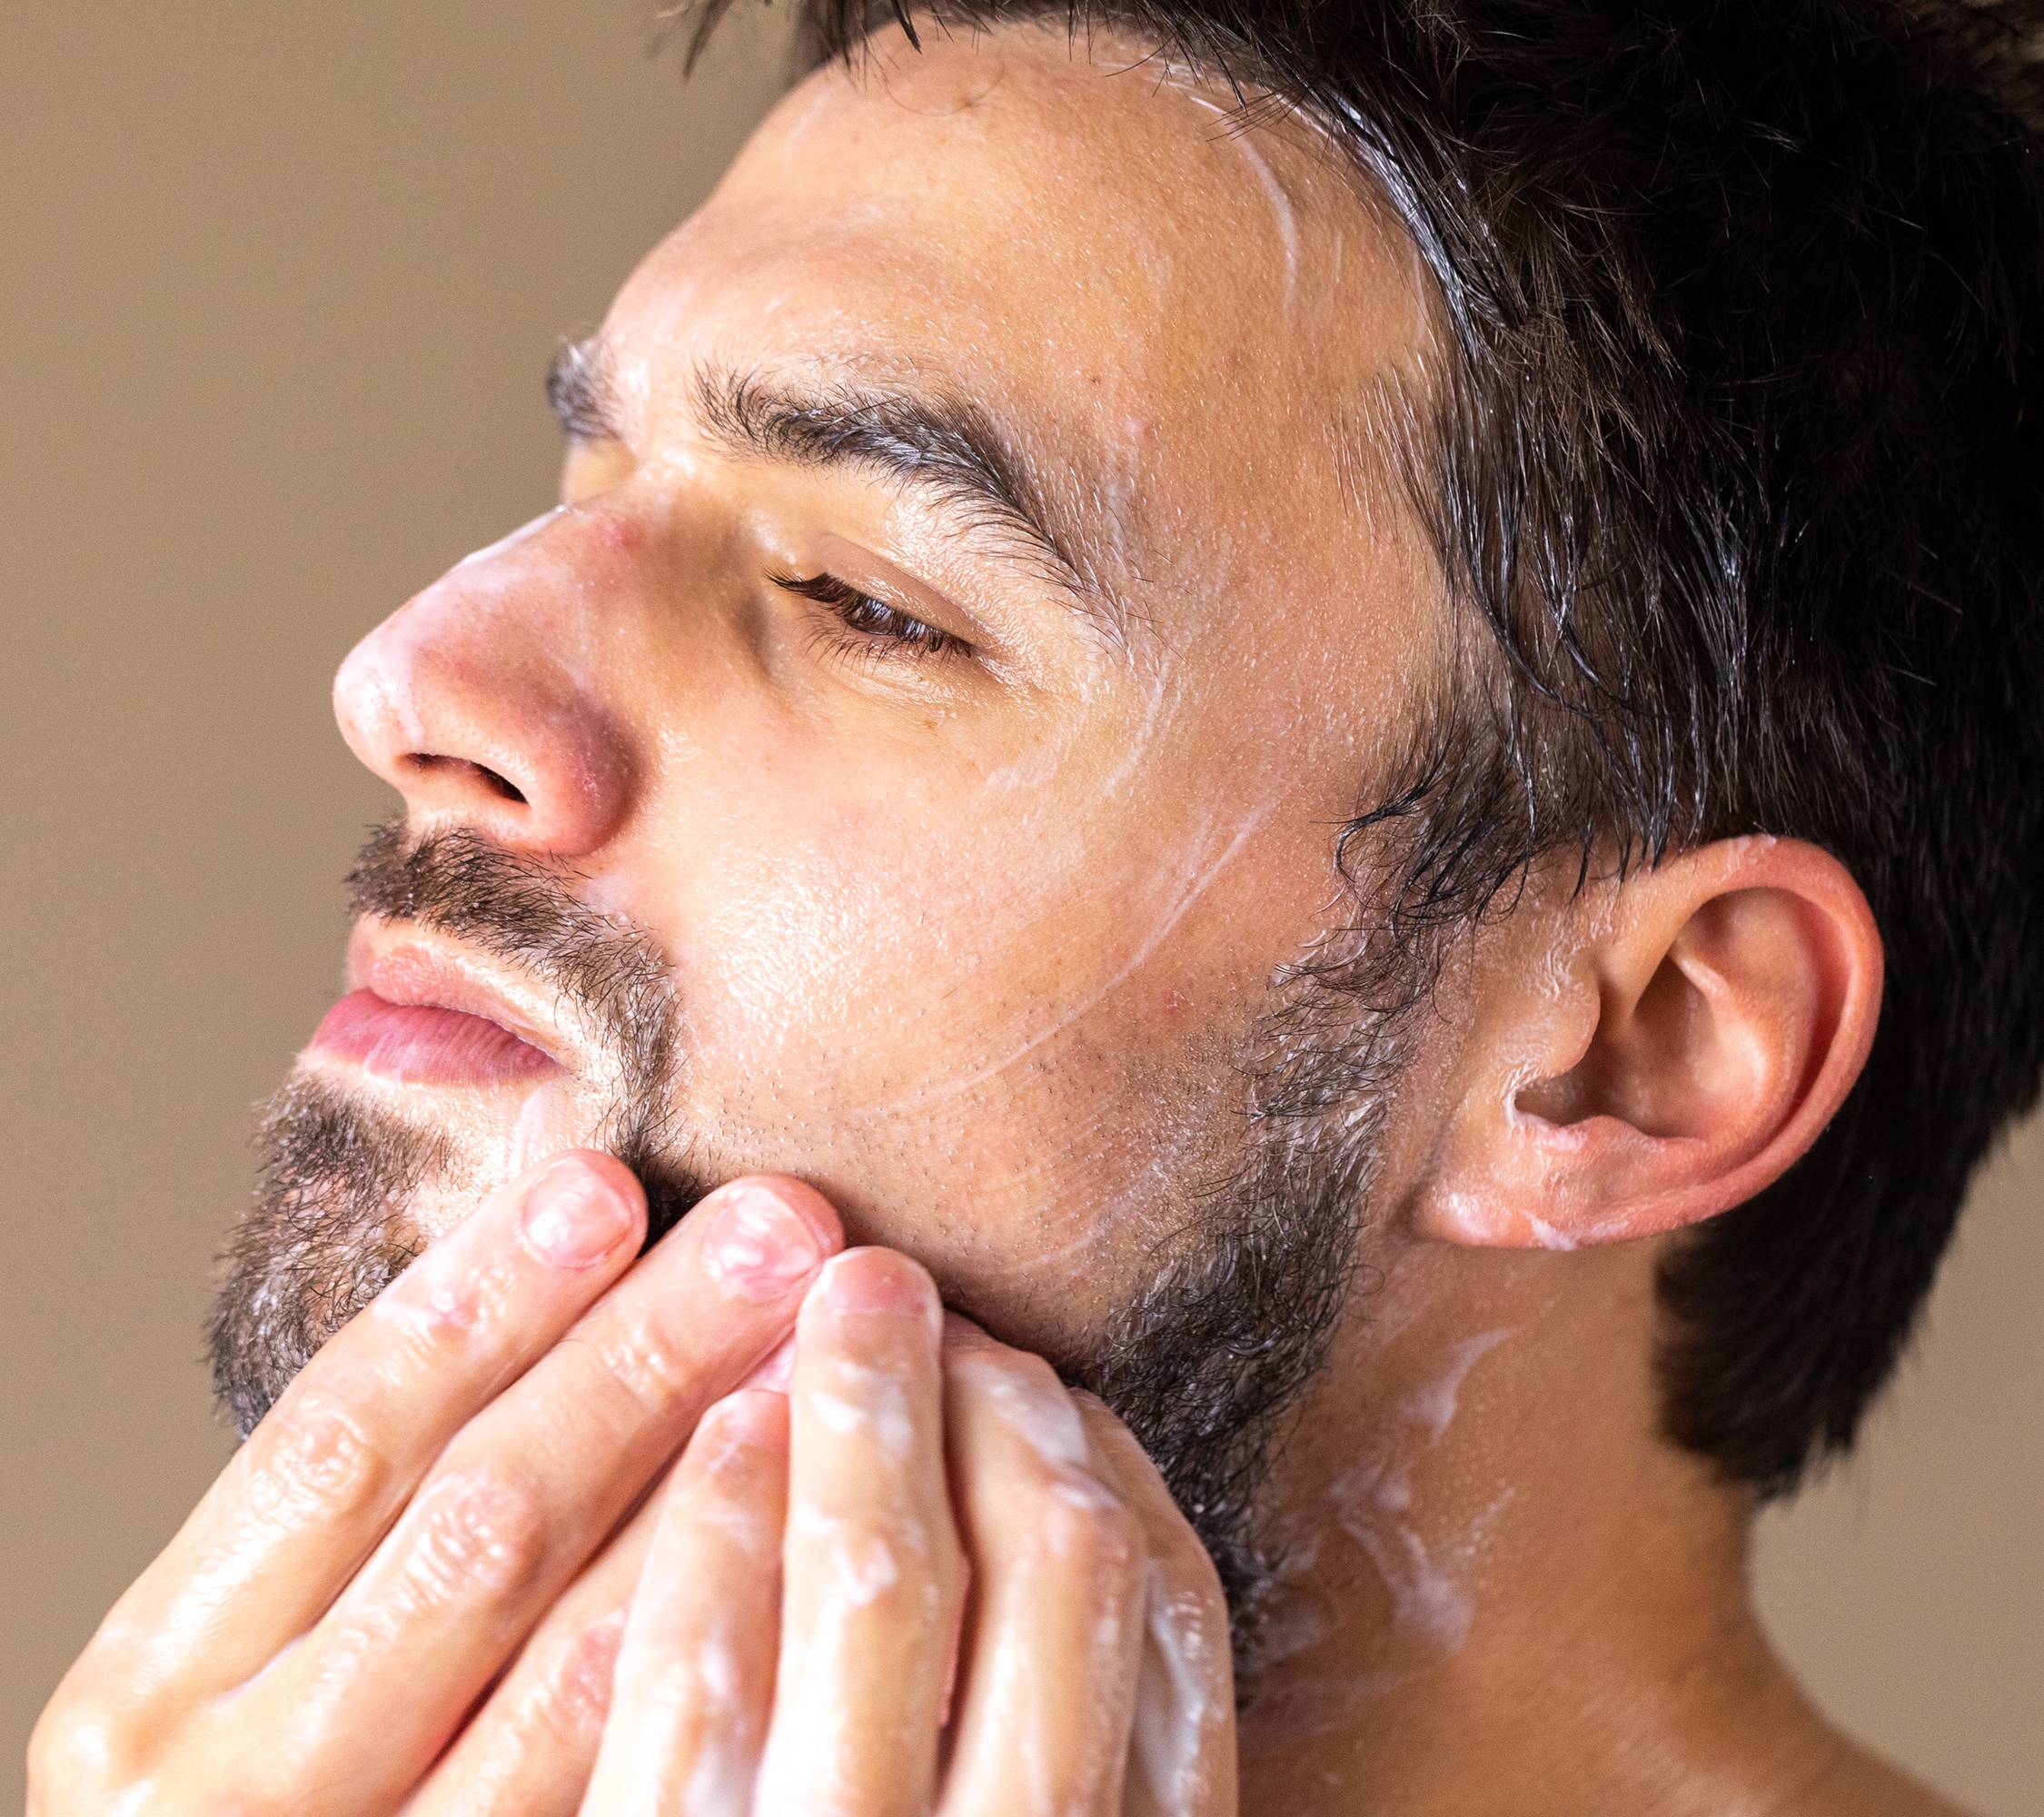 Kalamazoo, a thick, creamy coloured beard and facial wash, covers the hands, and is being worked through a dark beard.